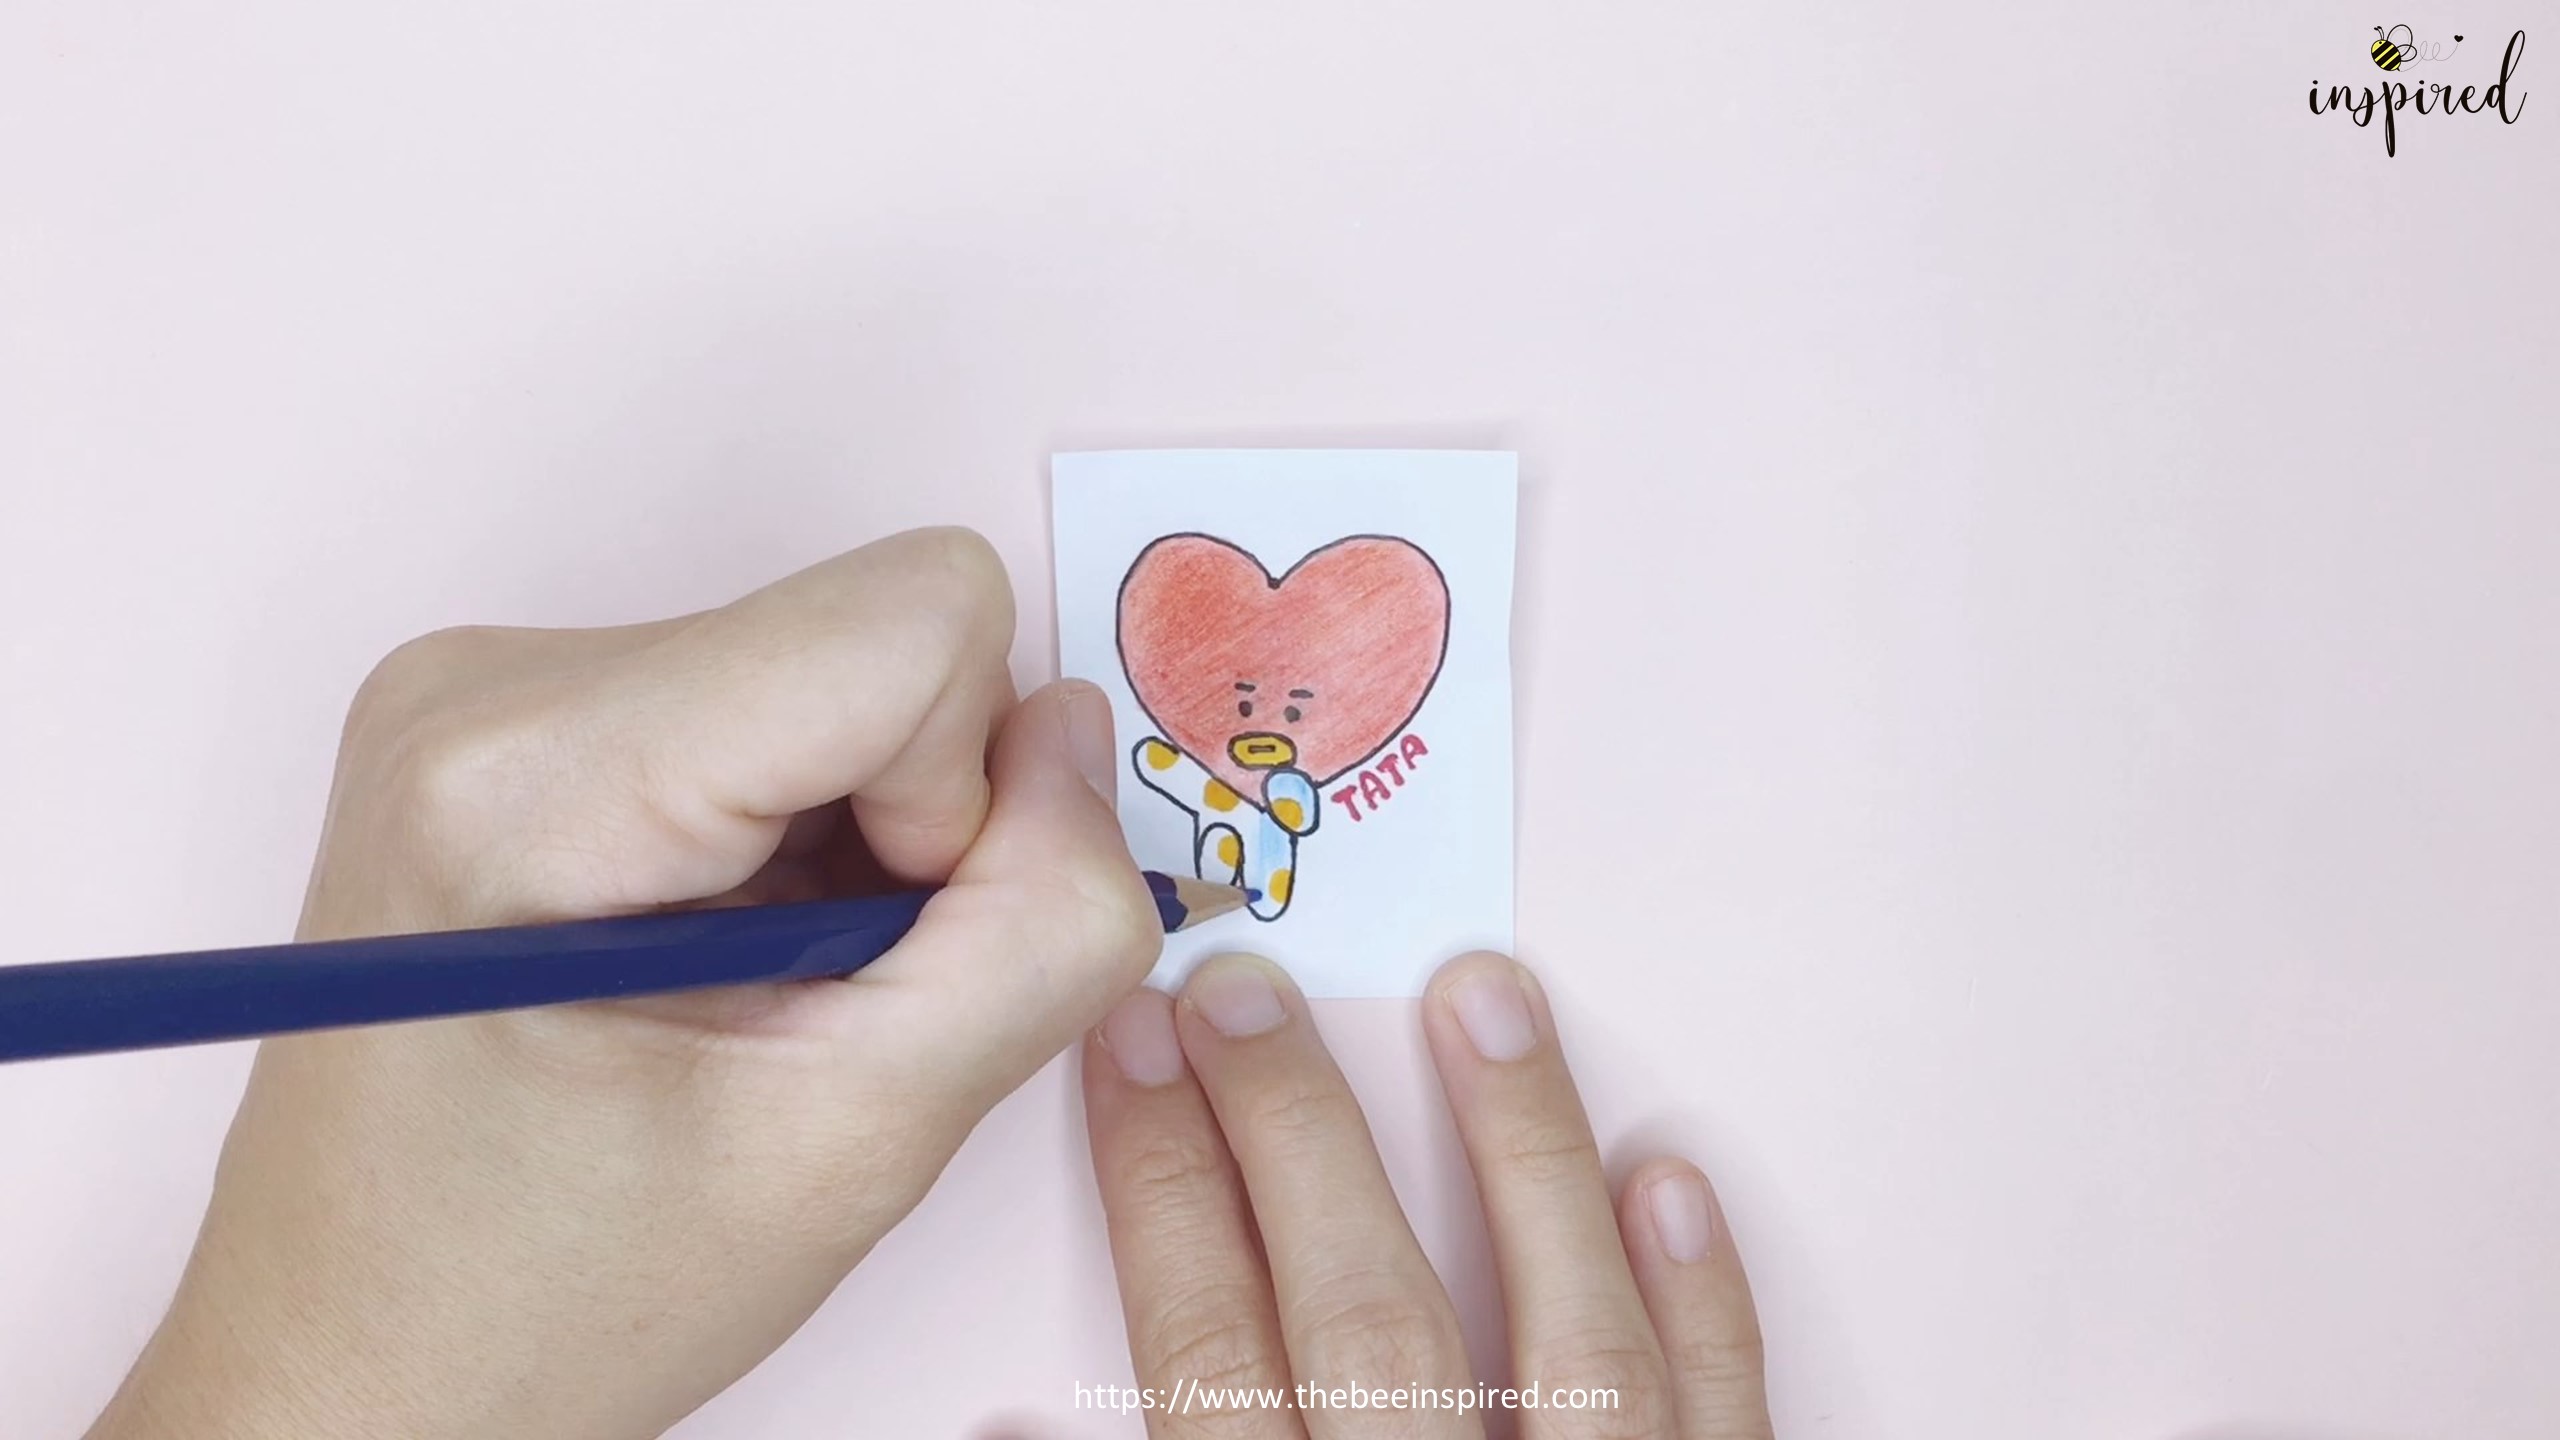 How to Make BTS Sticker from My Drawing without Sticker Paper_7